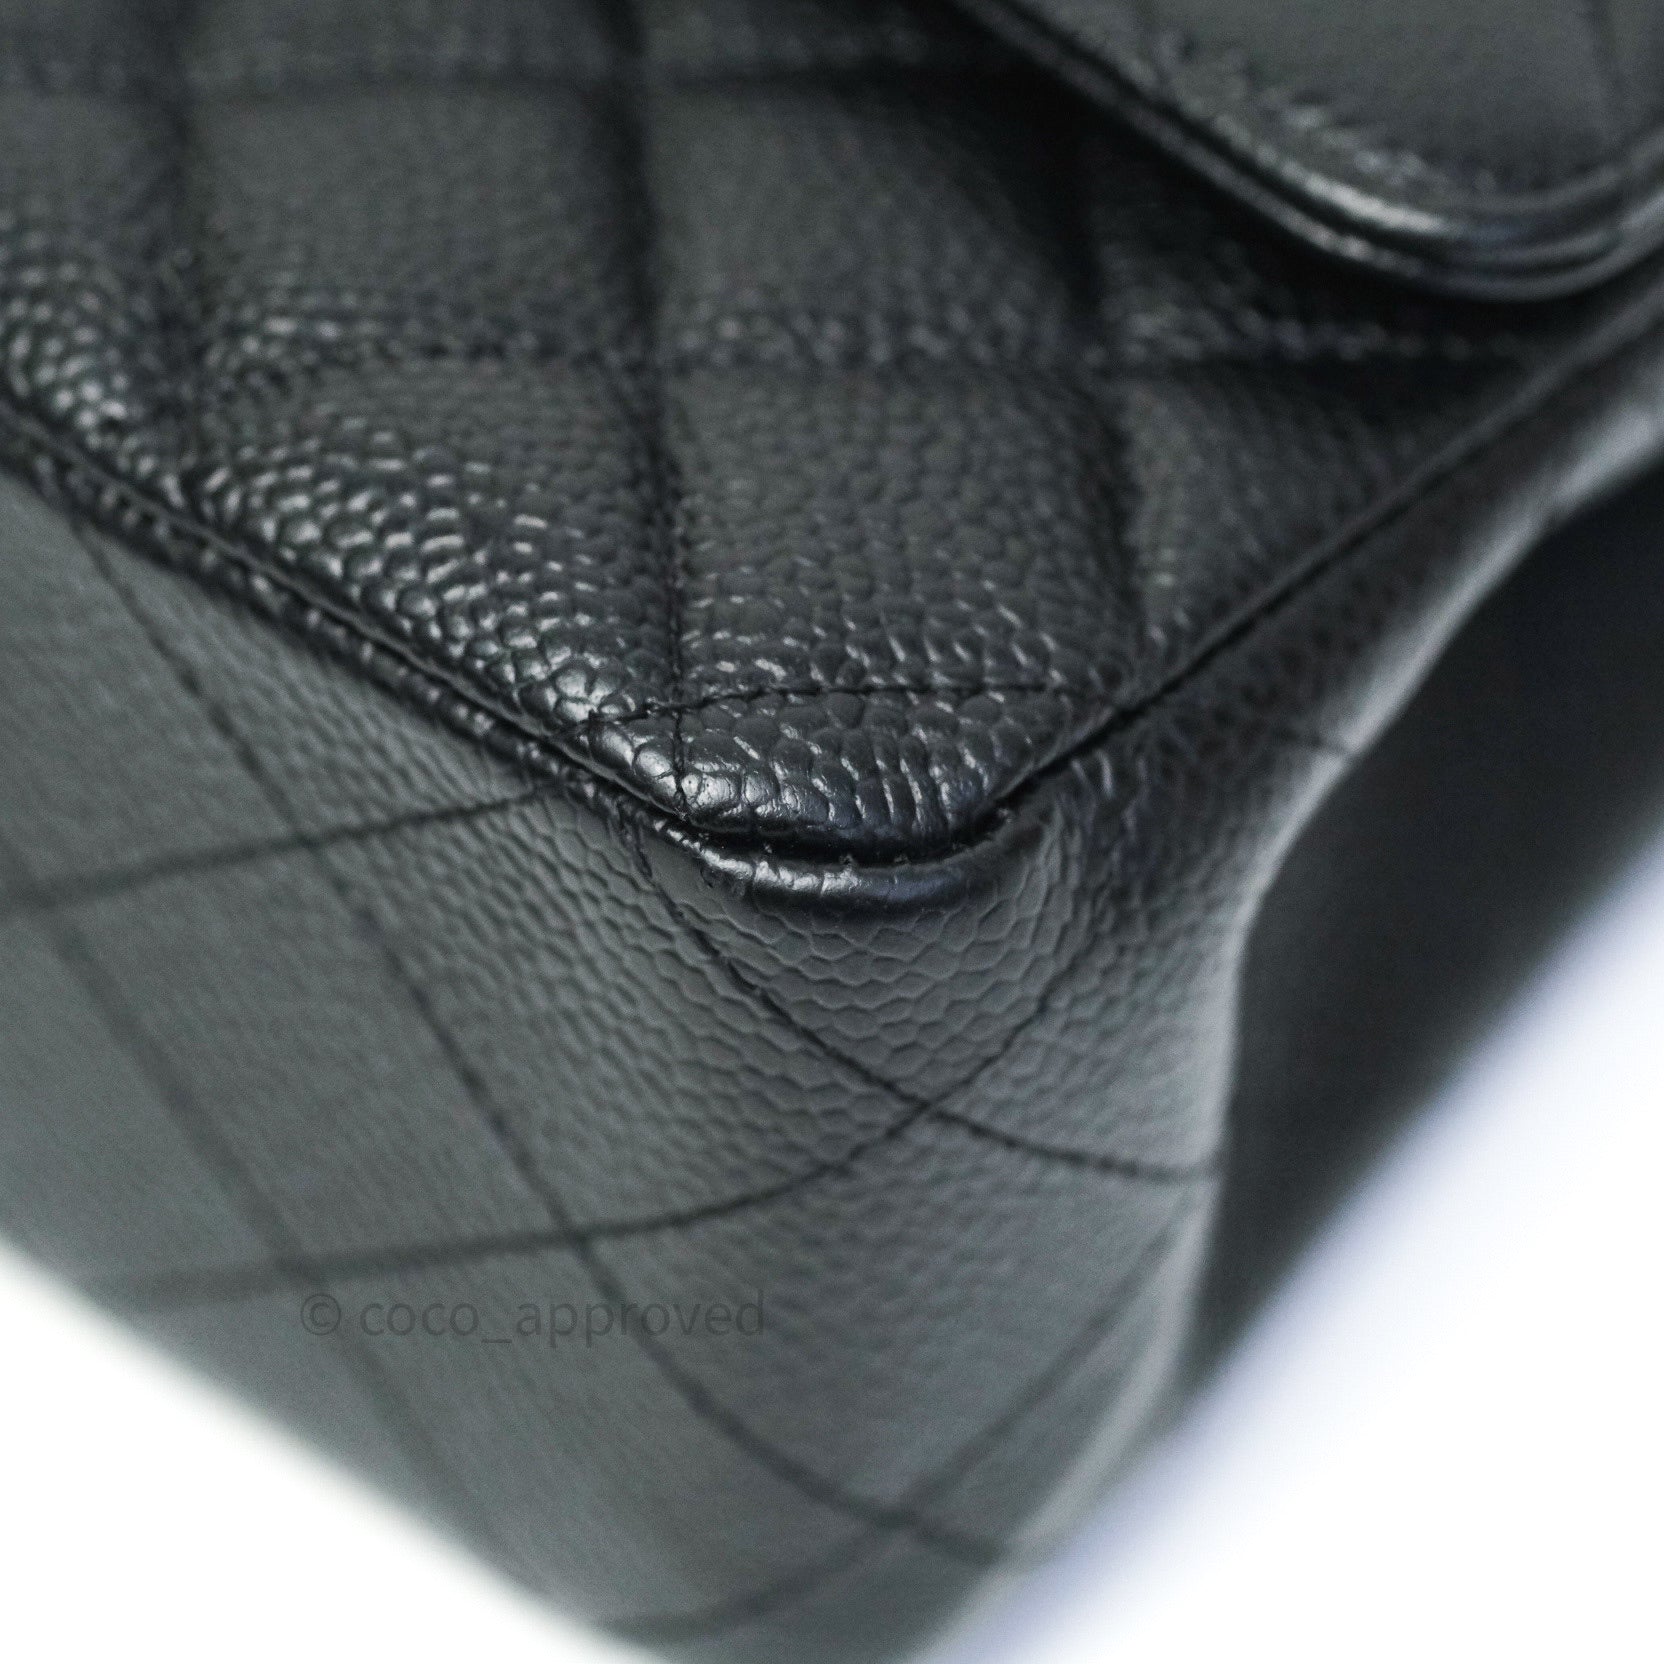 Classic Double Flap Caviar Leather … curated on LTK